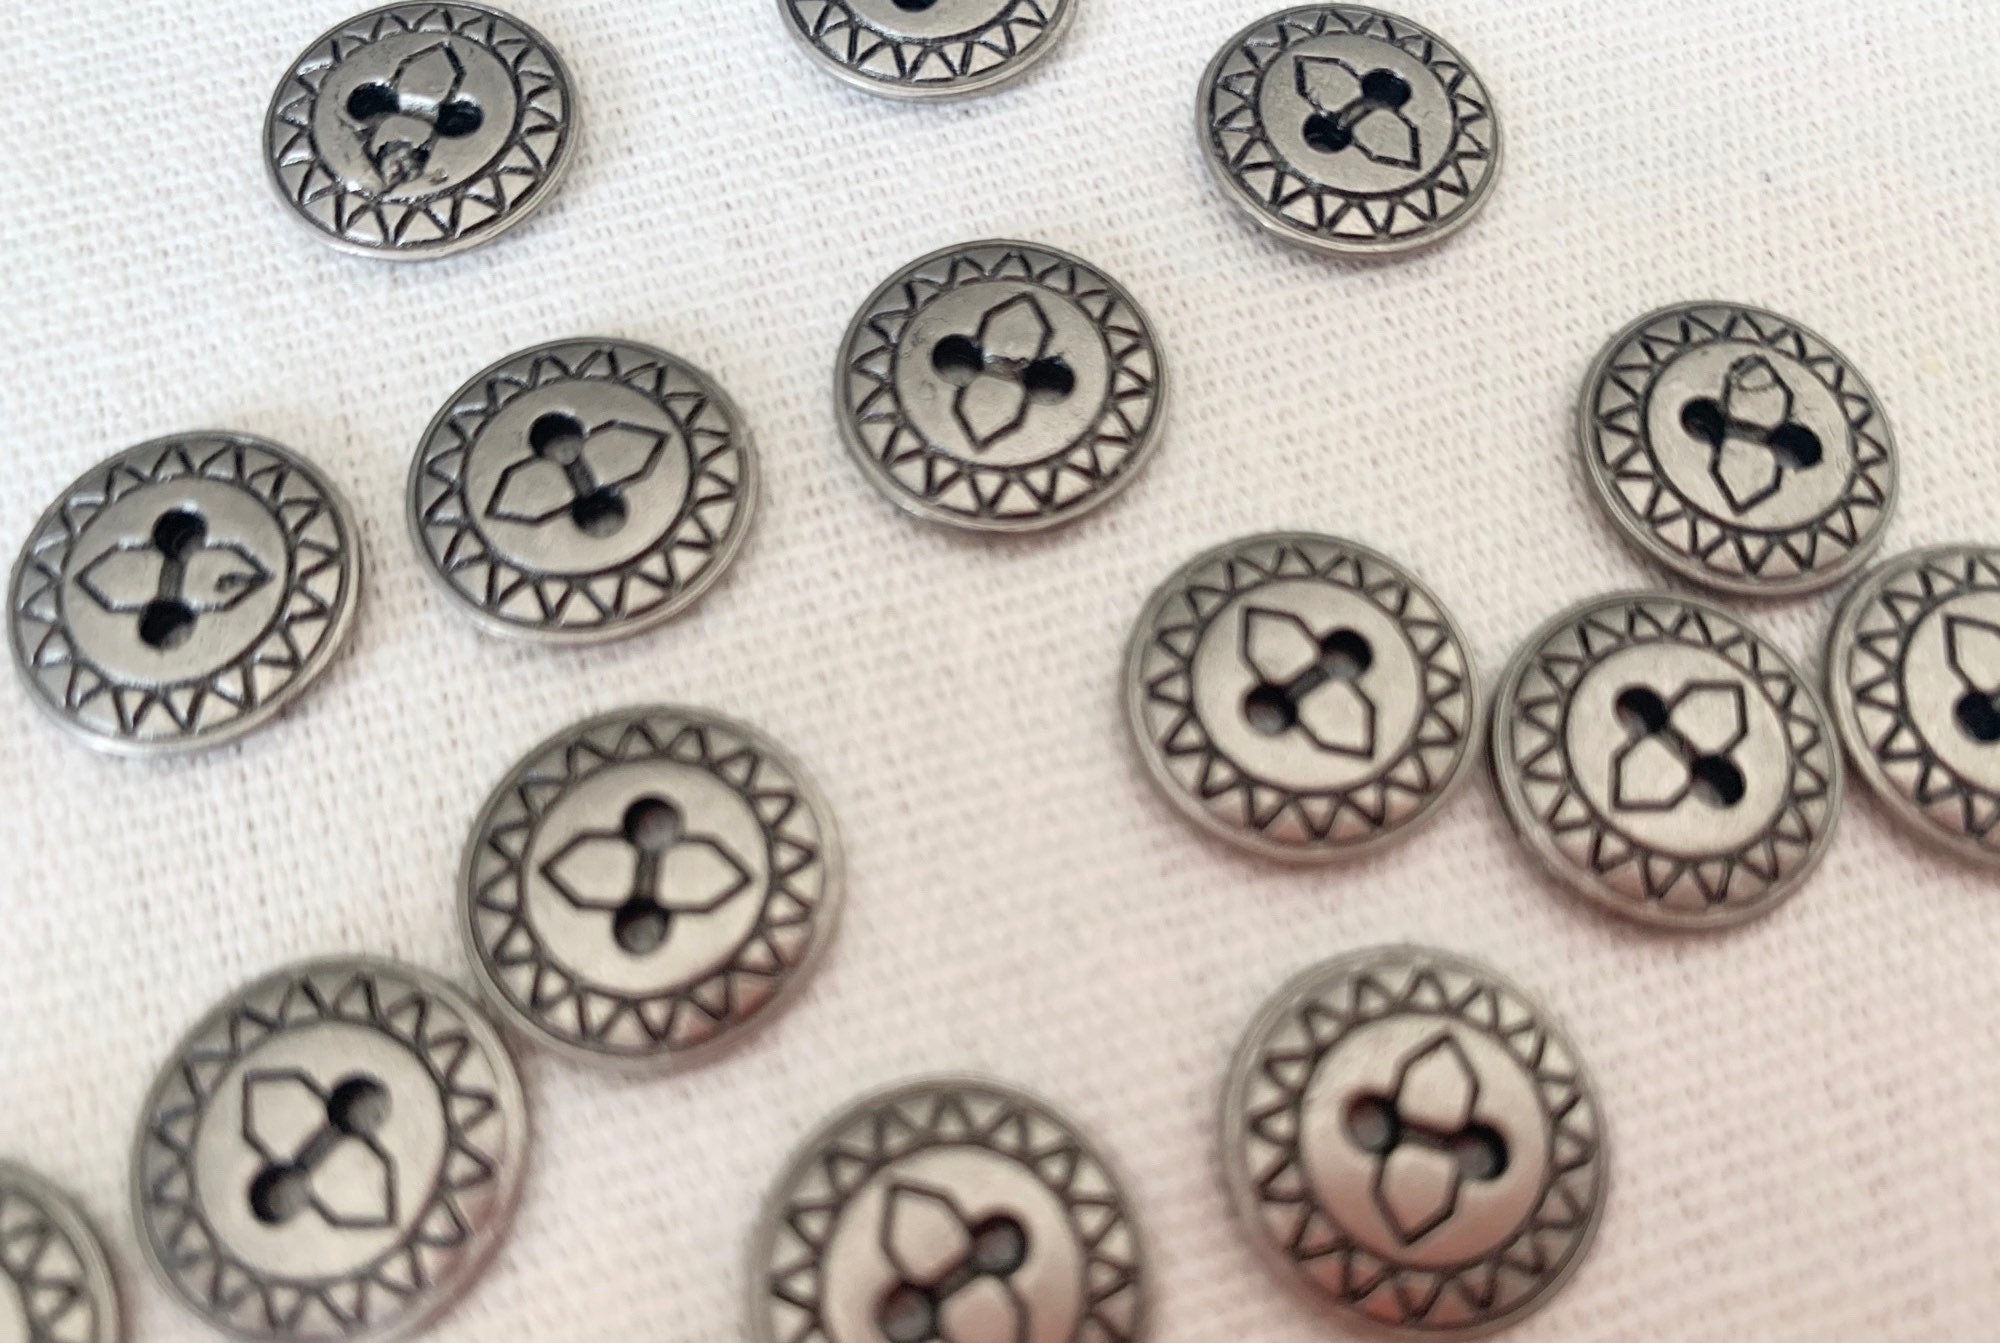 10 Antiqued Silver Metal Buttons 14mm X 14mm 4 Hole Silver Button